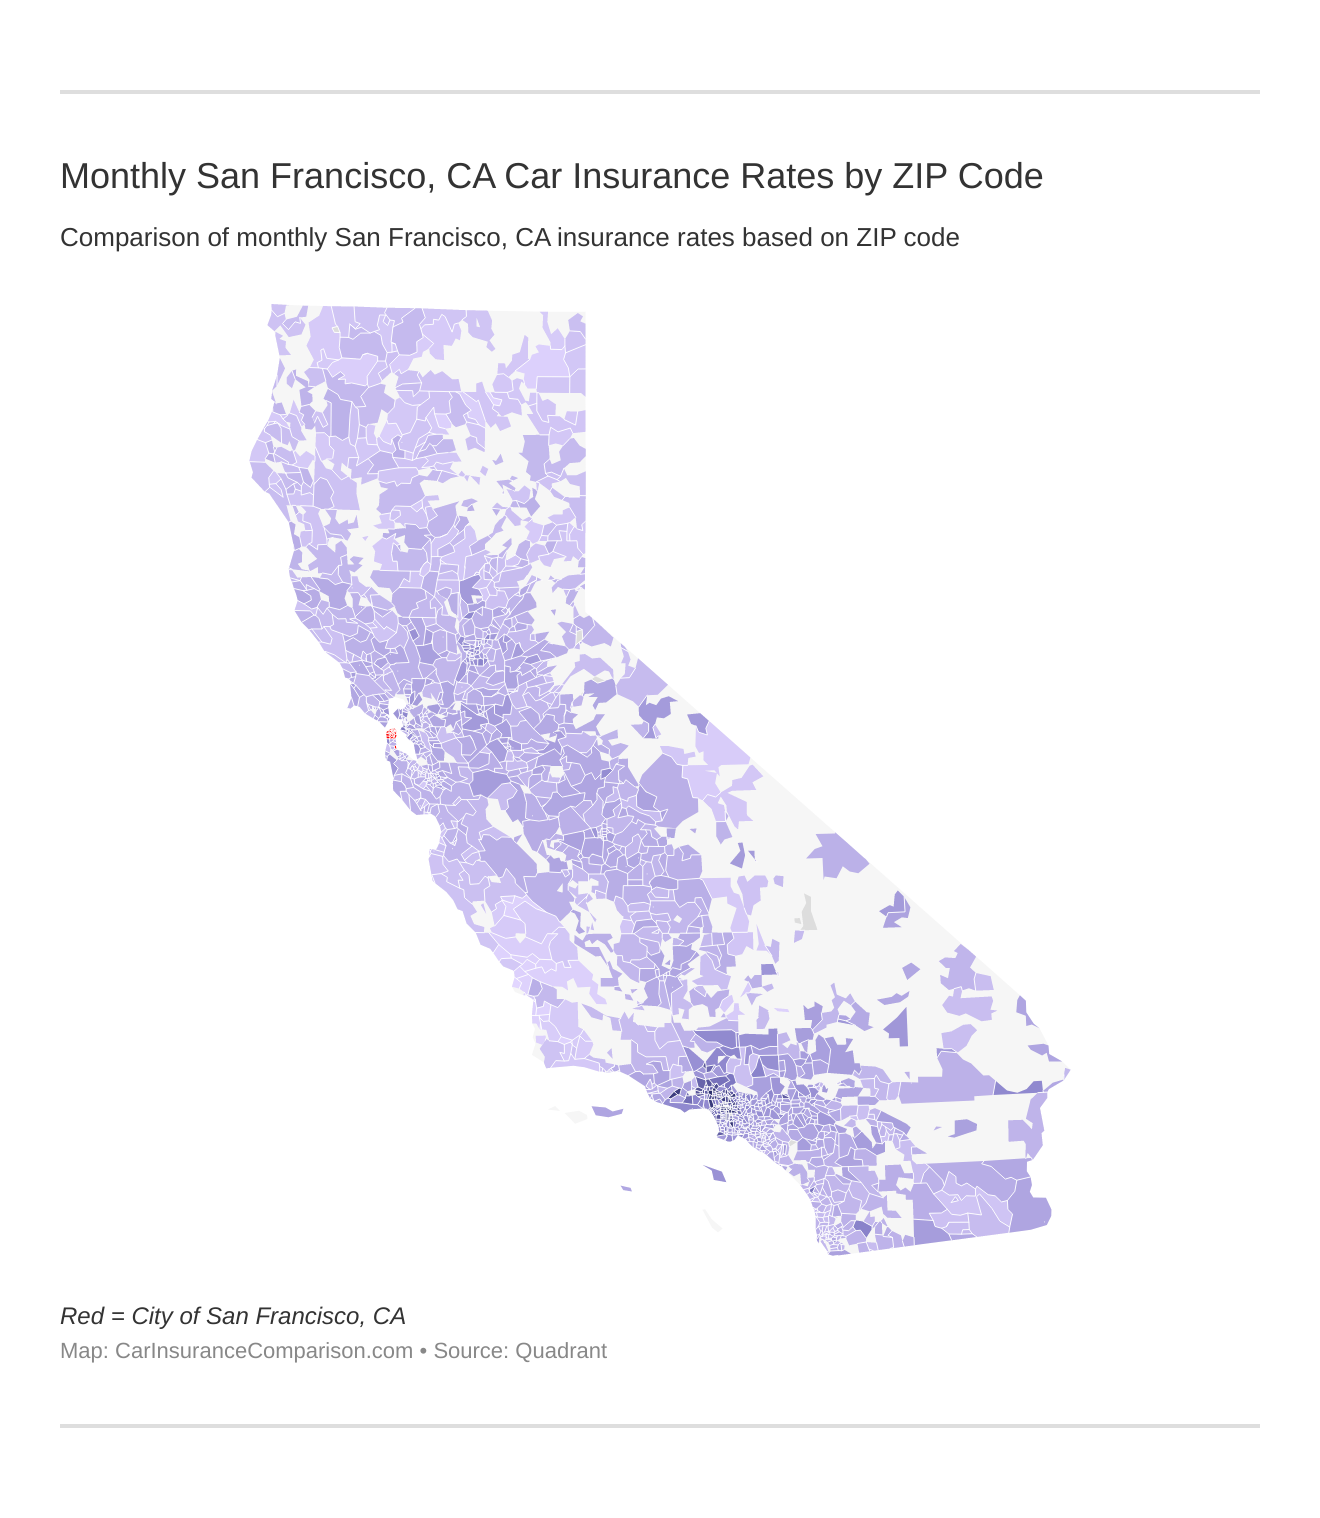 Monthly San Francisco, CA Car Insurance Rates by ZIP Code